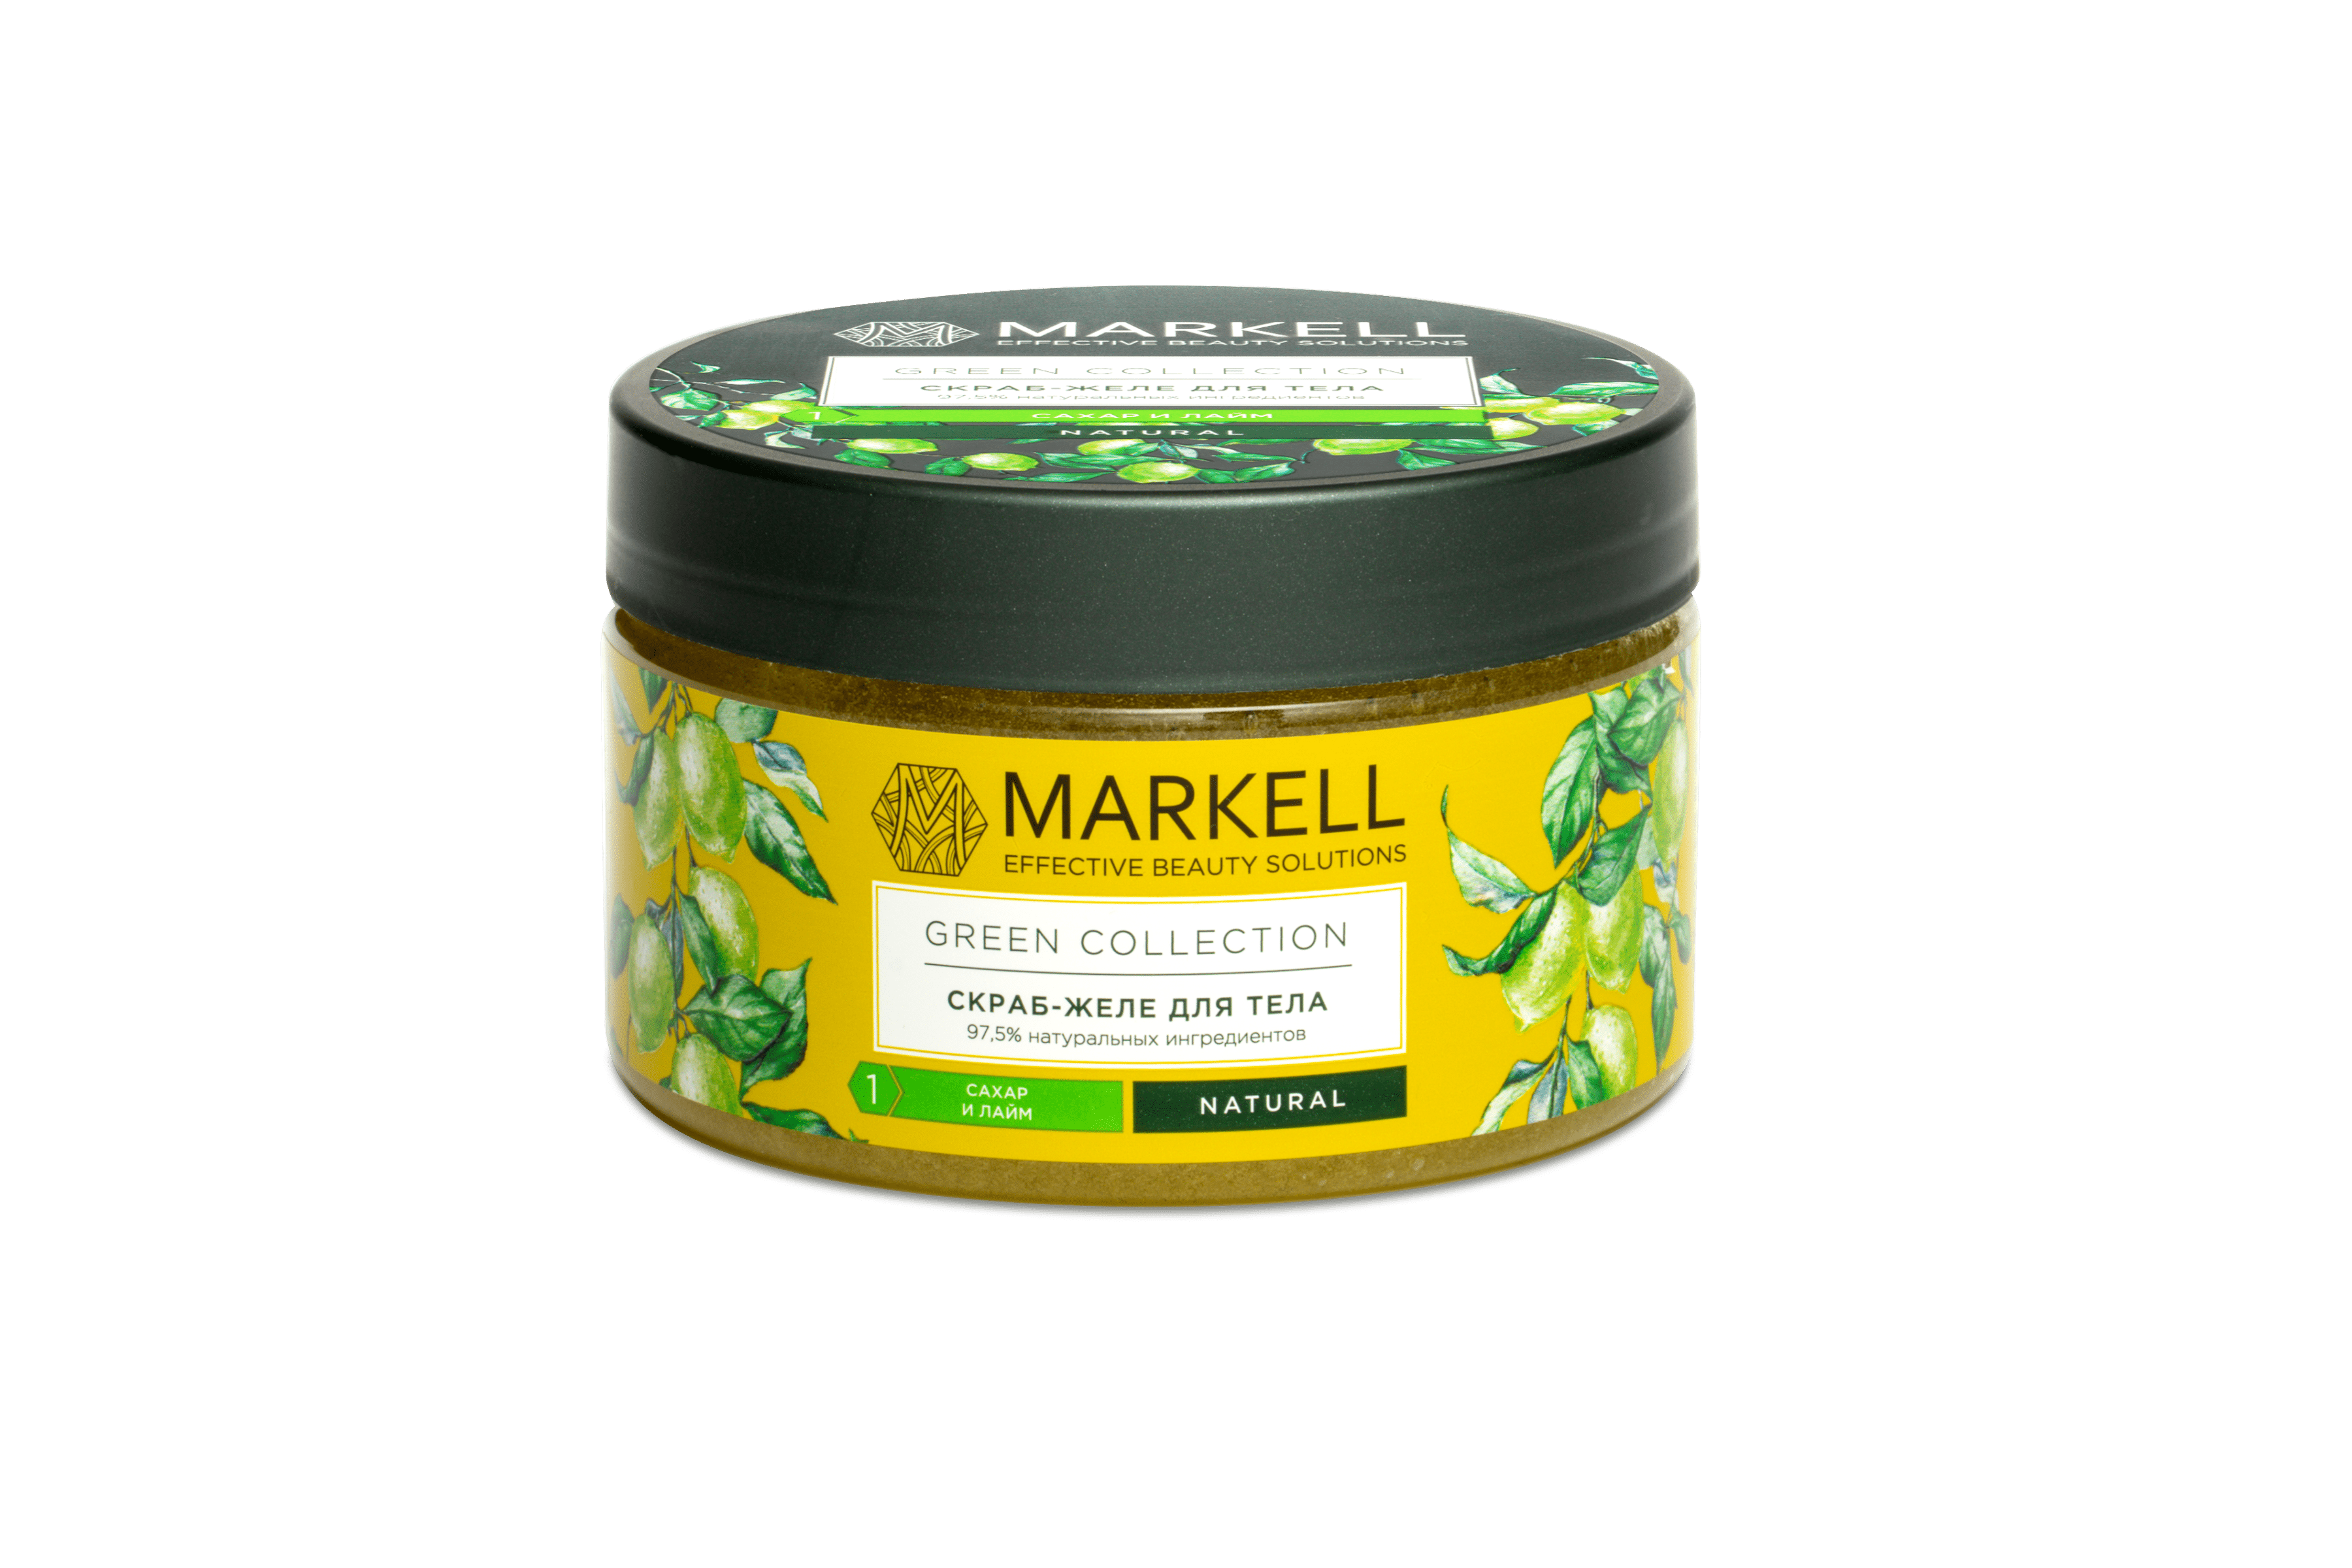 Markell Green Collection Скраб-желе для тела Сахар и лайм, 250мл